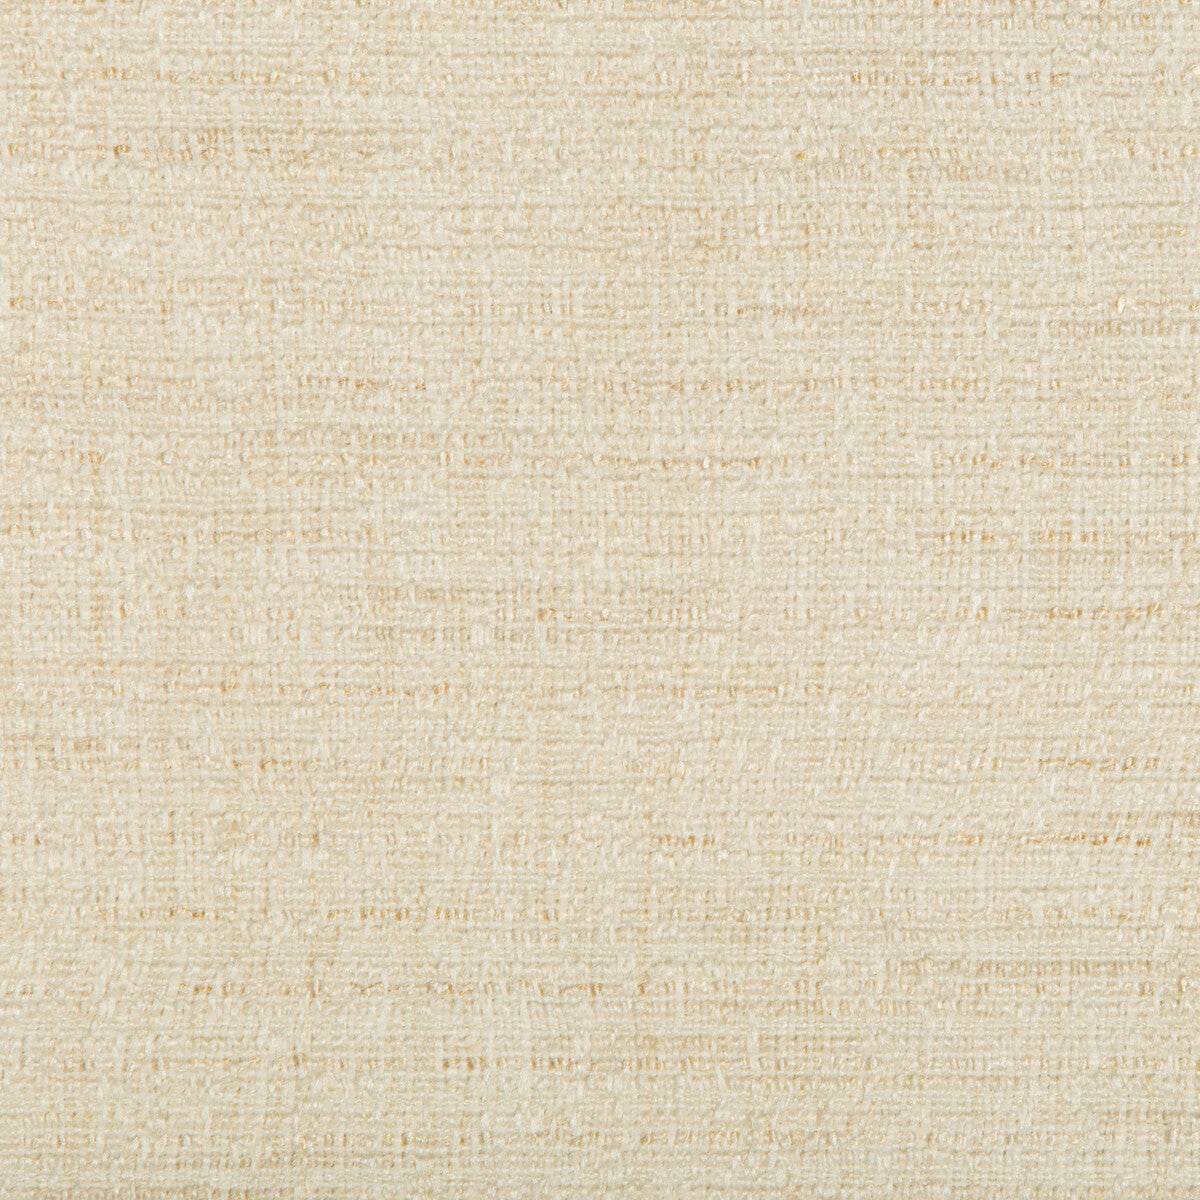 Kravet Smart fabric in 35396-116 color - pattern 35396.116.0 - by Kravet Smart in the Performance Crypton Home collection